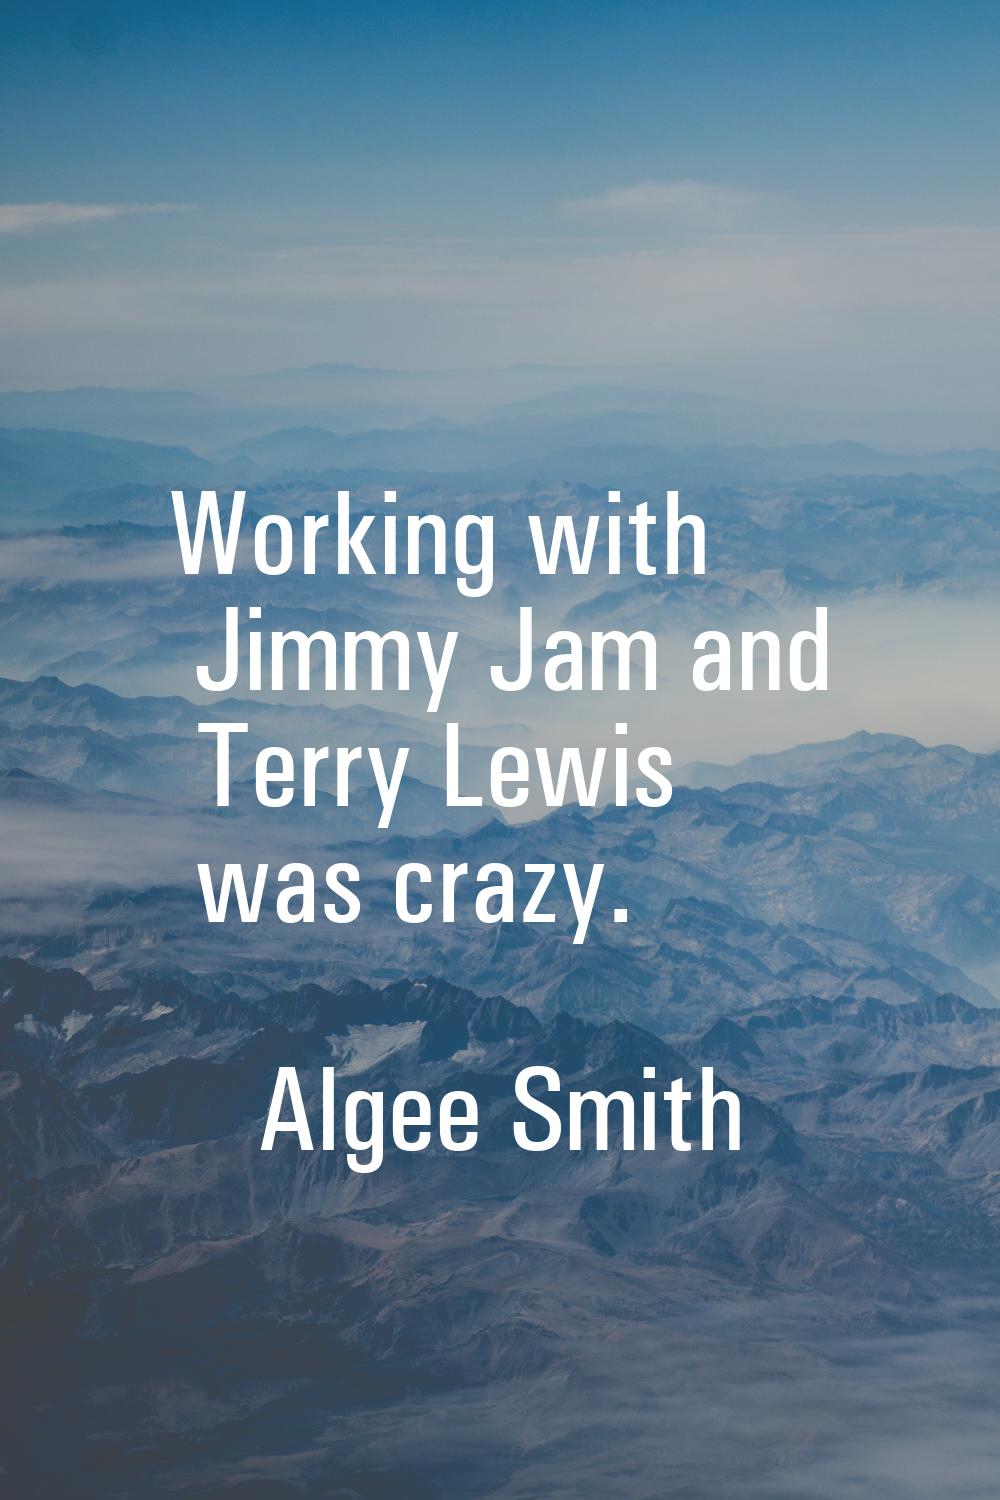 Working with Jimmy Jam and Terry Lewis was crazy.